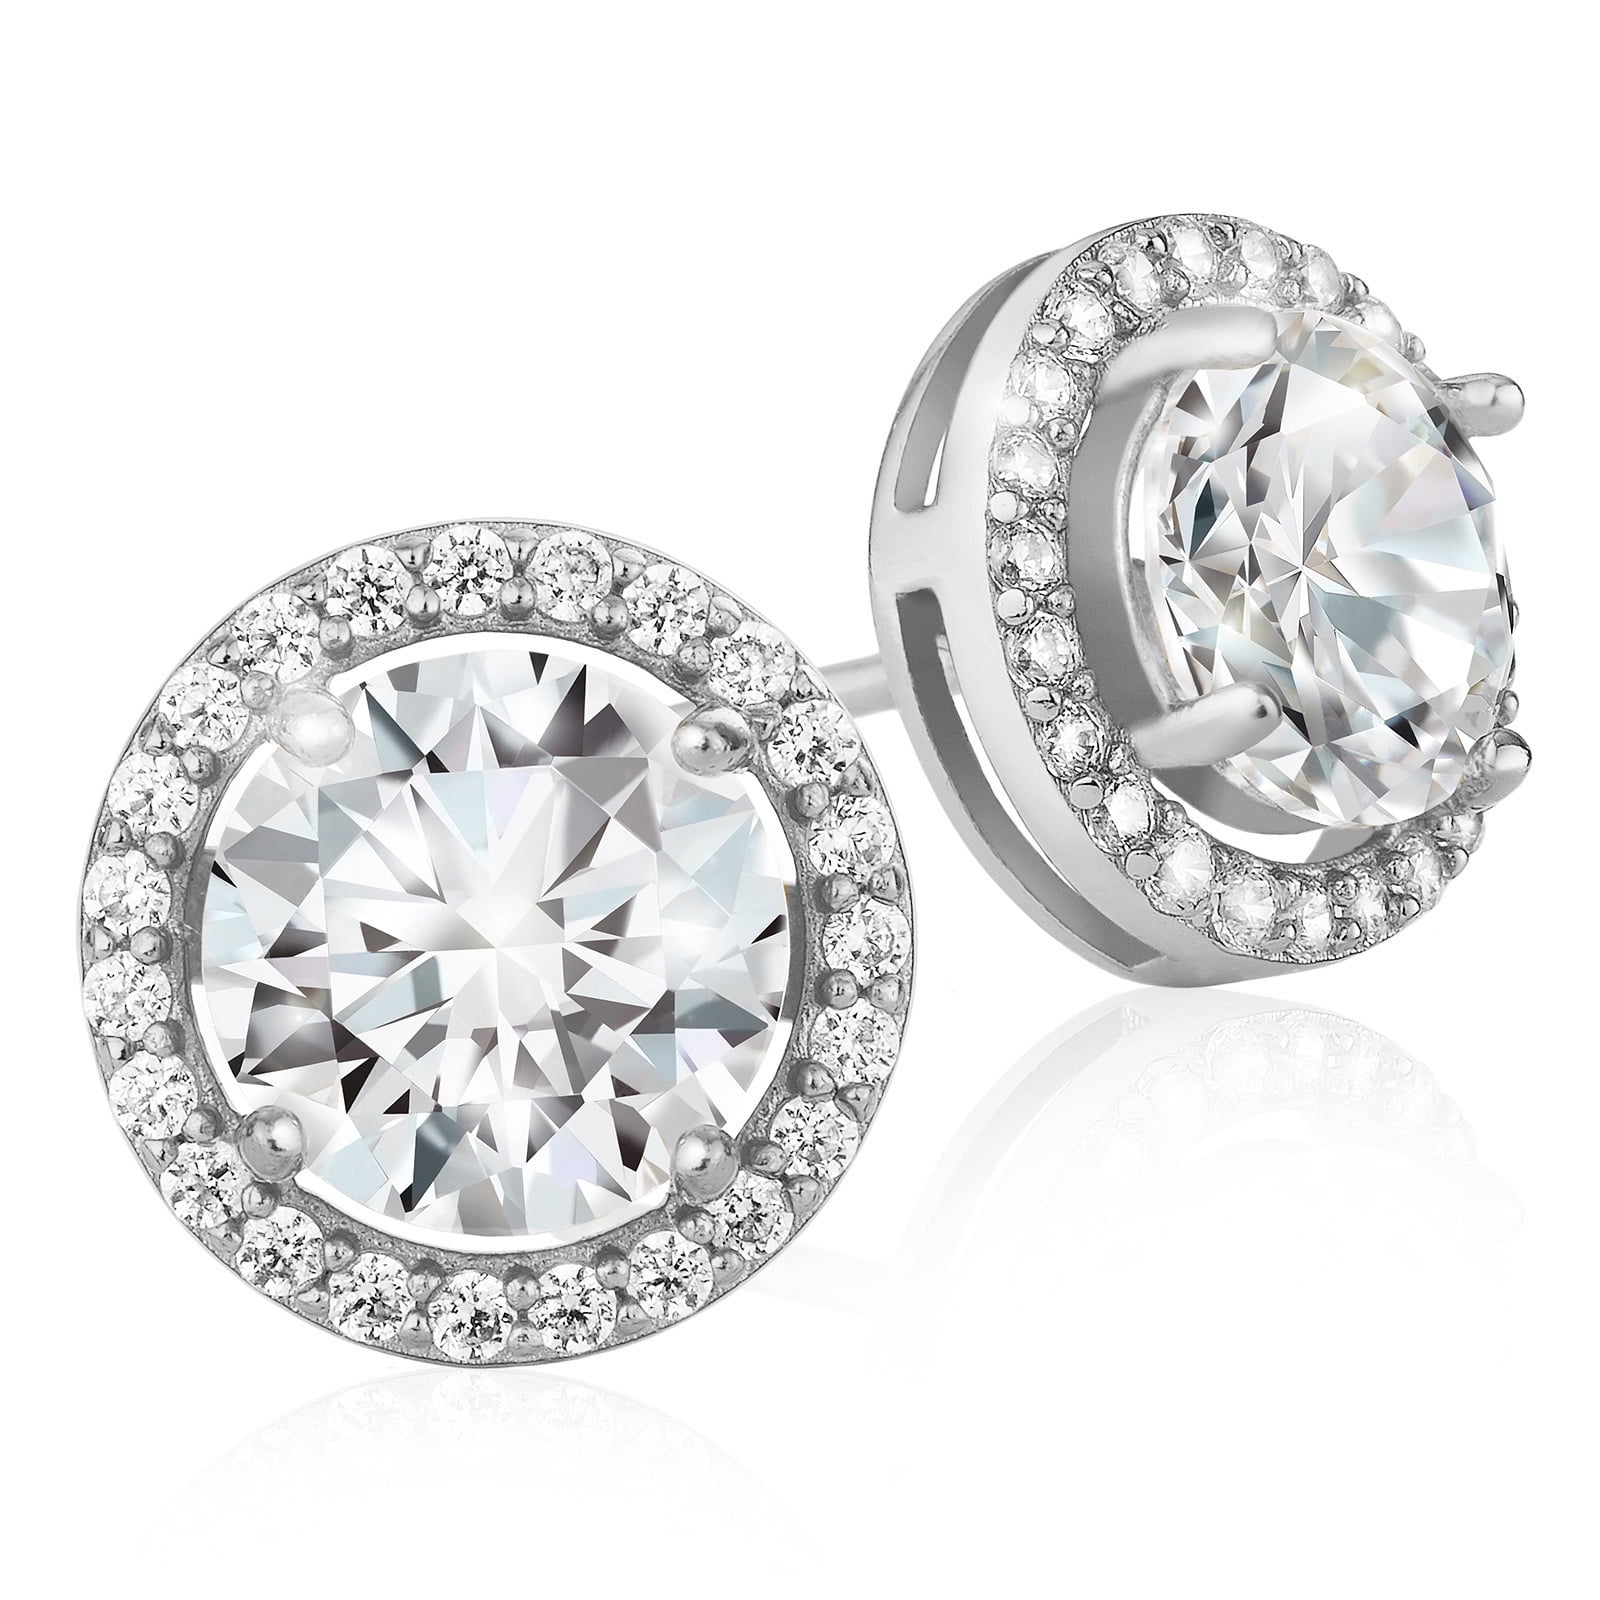 Round Cut Cubic Zirconia Stud Earrings in14k White Gold Over Sterling Silver 0.57 Cttw